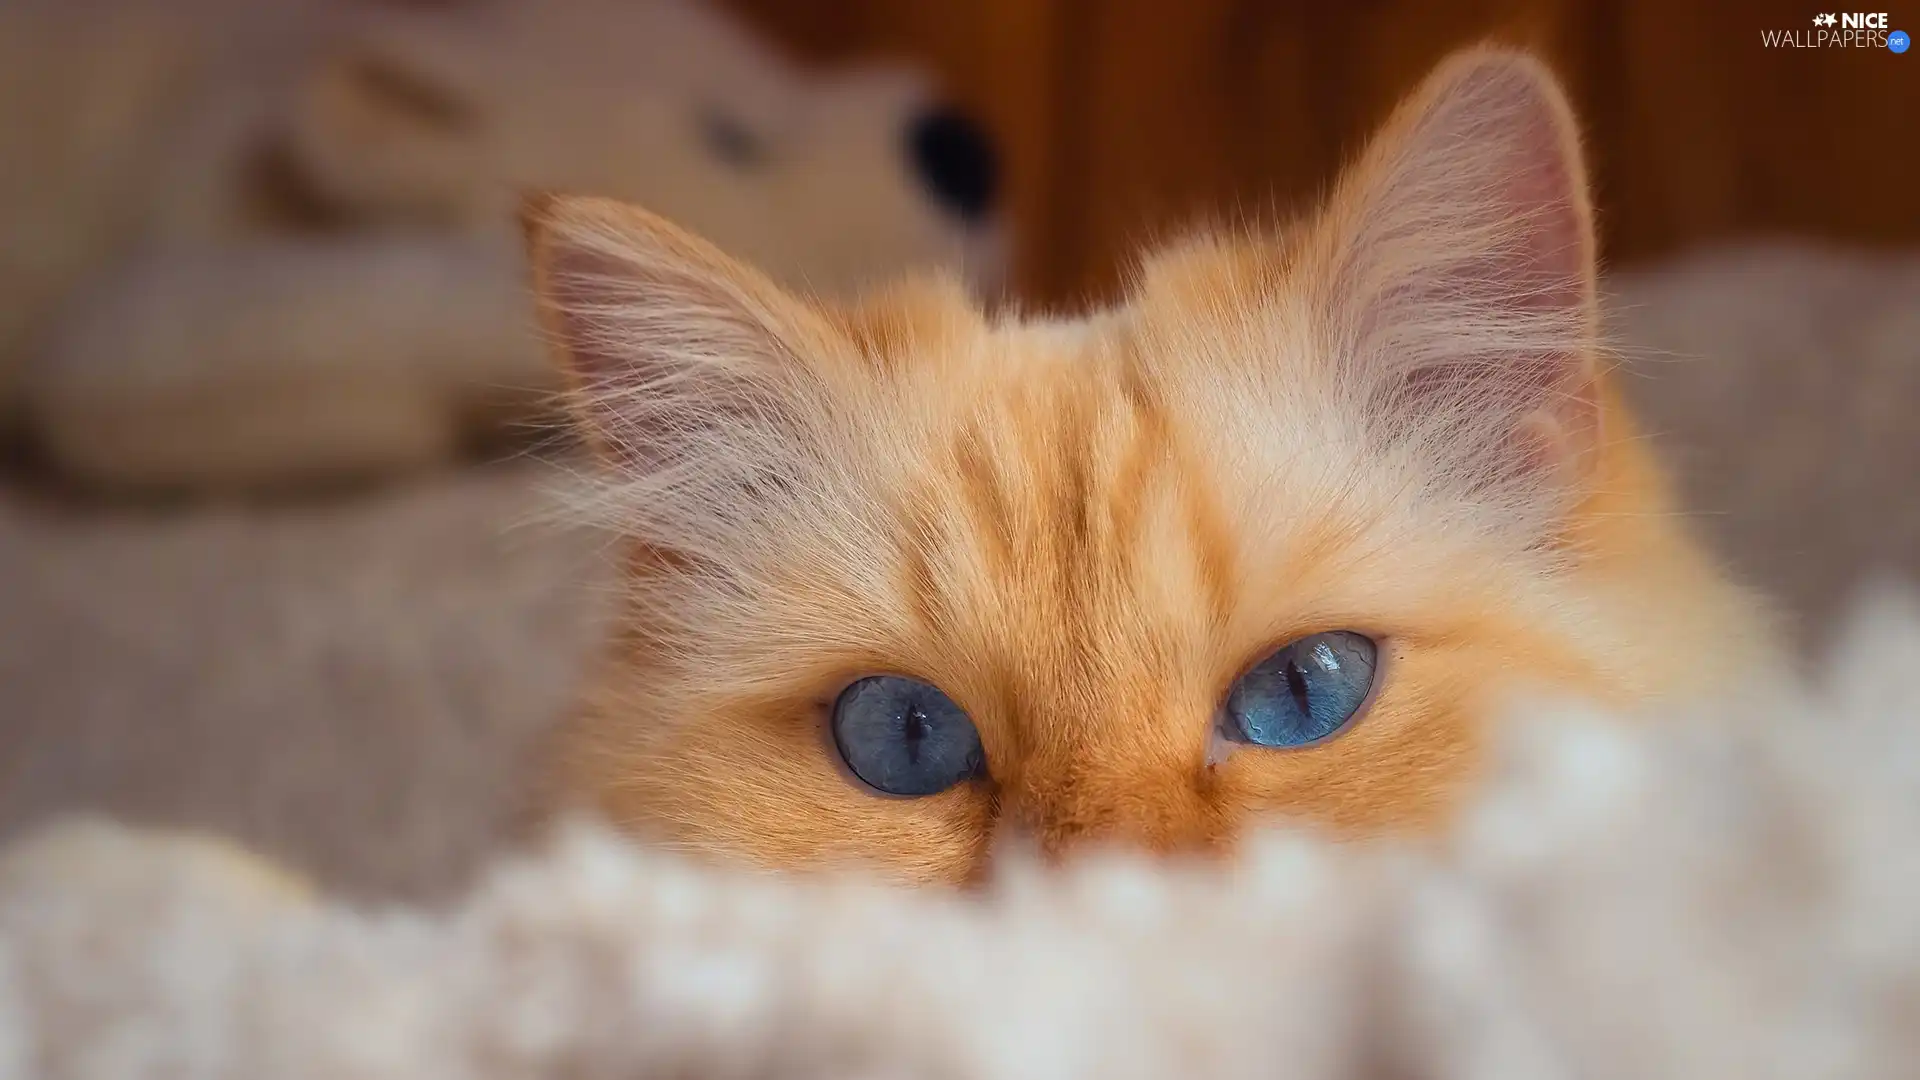 The look, coverlet, ginger, cat, Blue Eyed